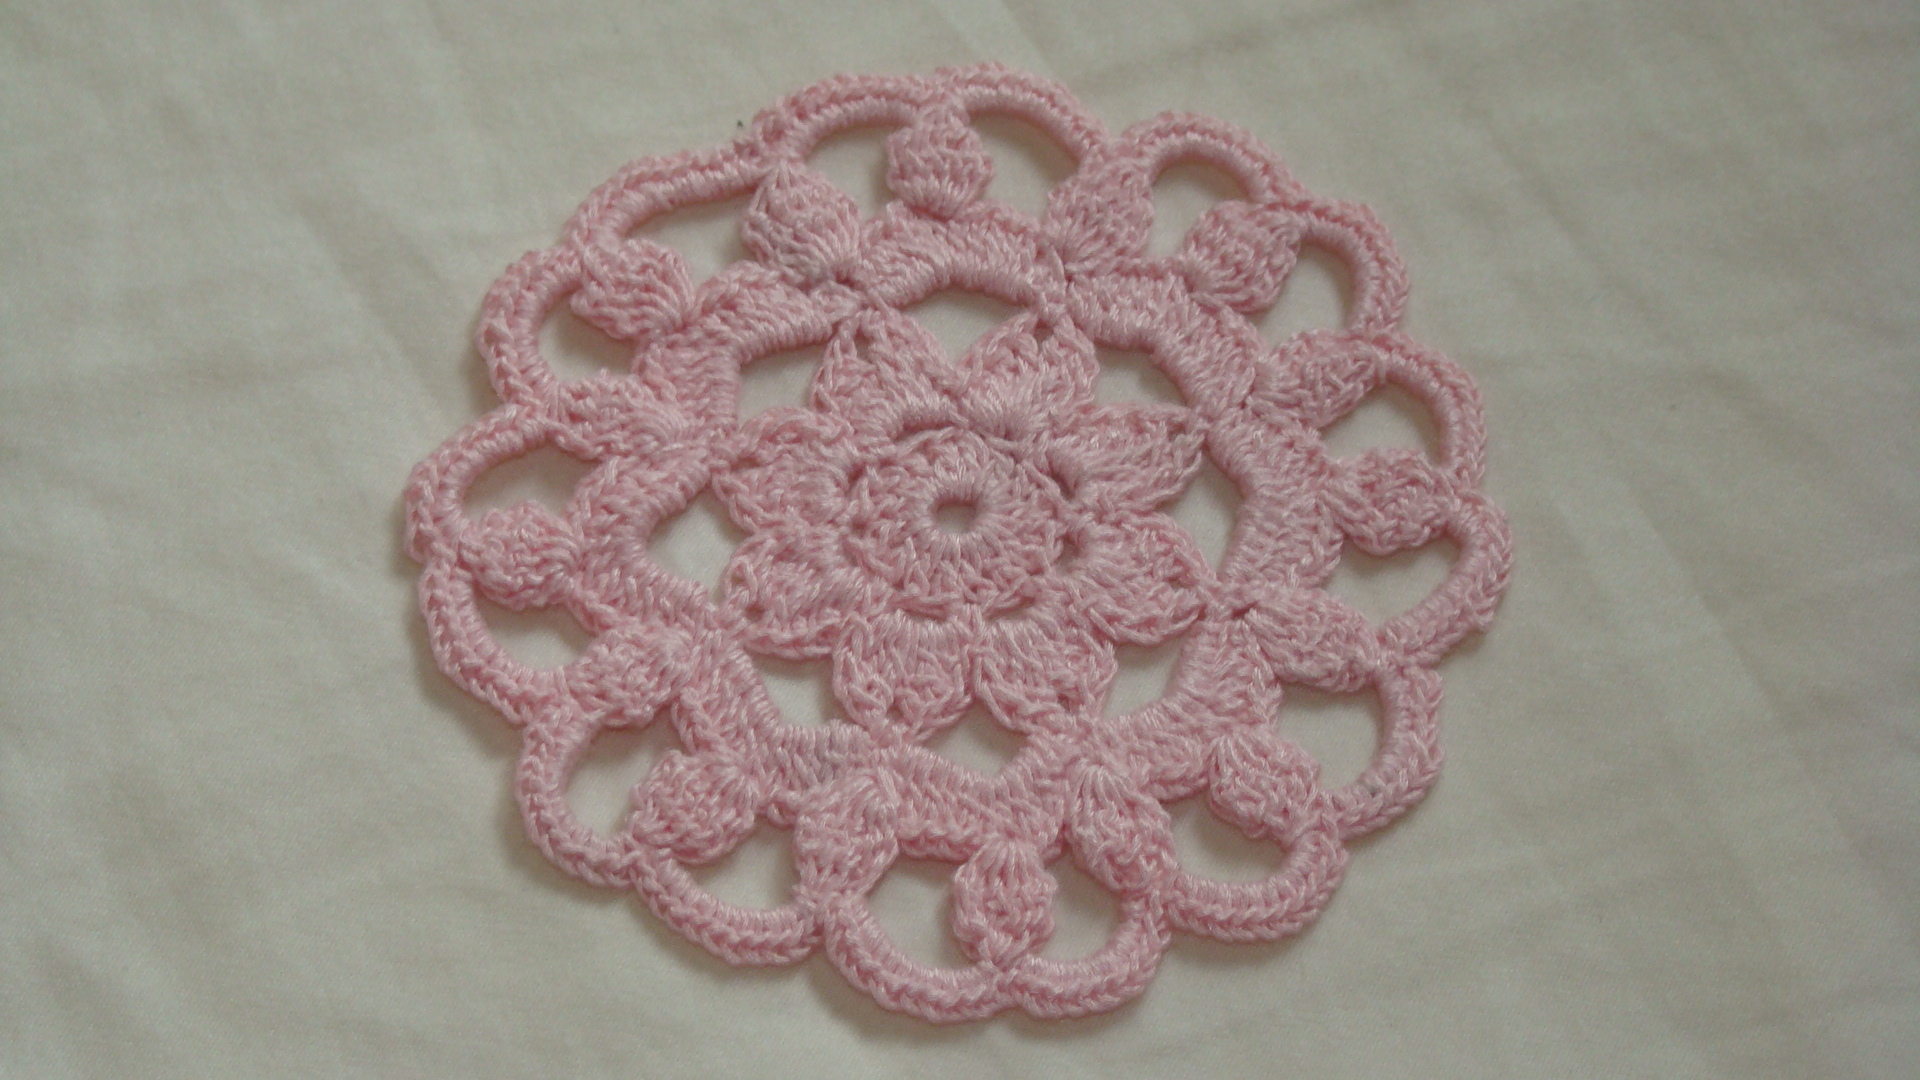 Free Crochet Doily Patterns Crochet Patterns Easy And Free Crochet This Mini Doily Today